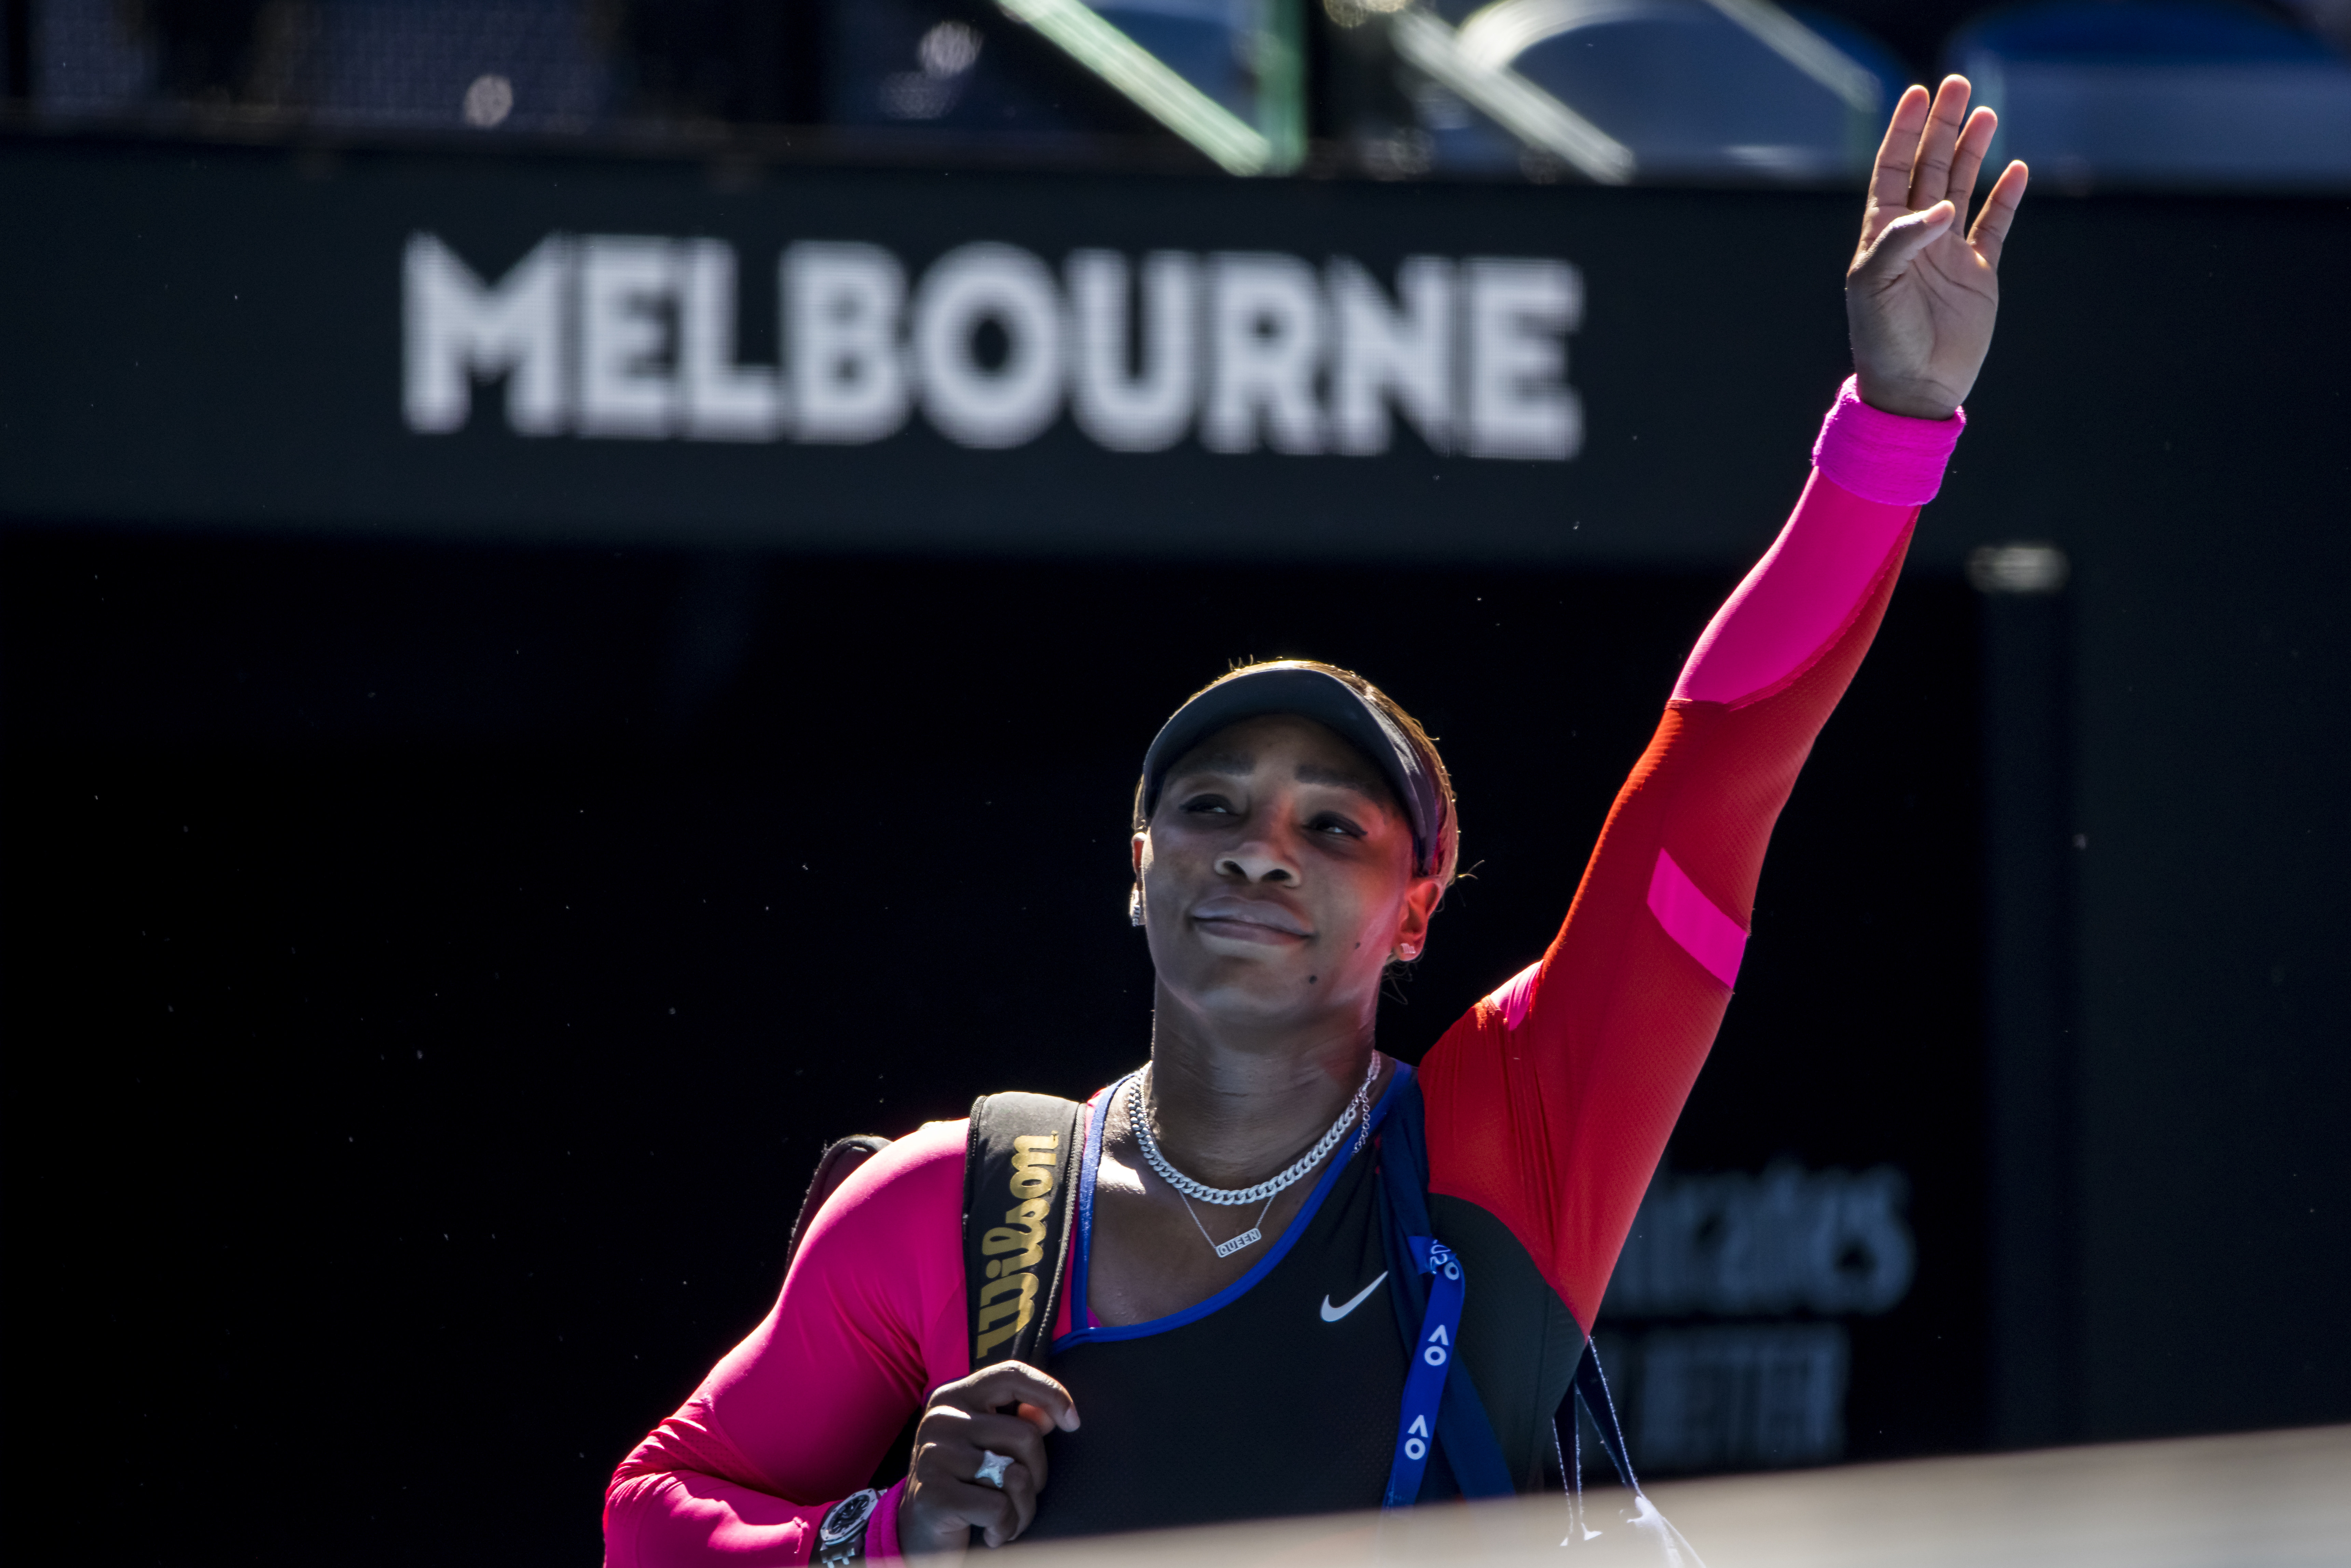 Serena Williams waves farewell after losing against Naomi Osaka at the 2021 Australian Open